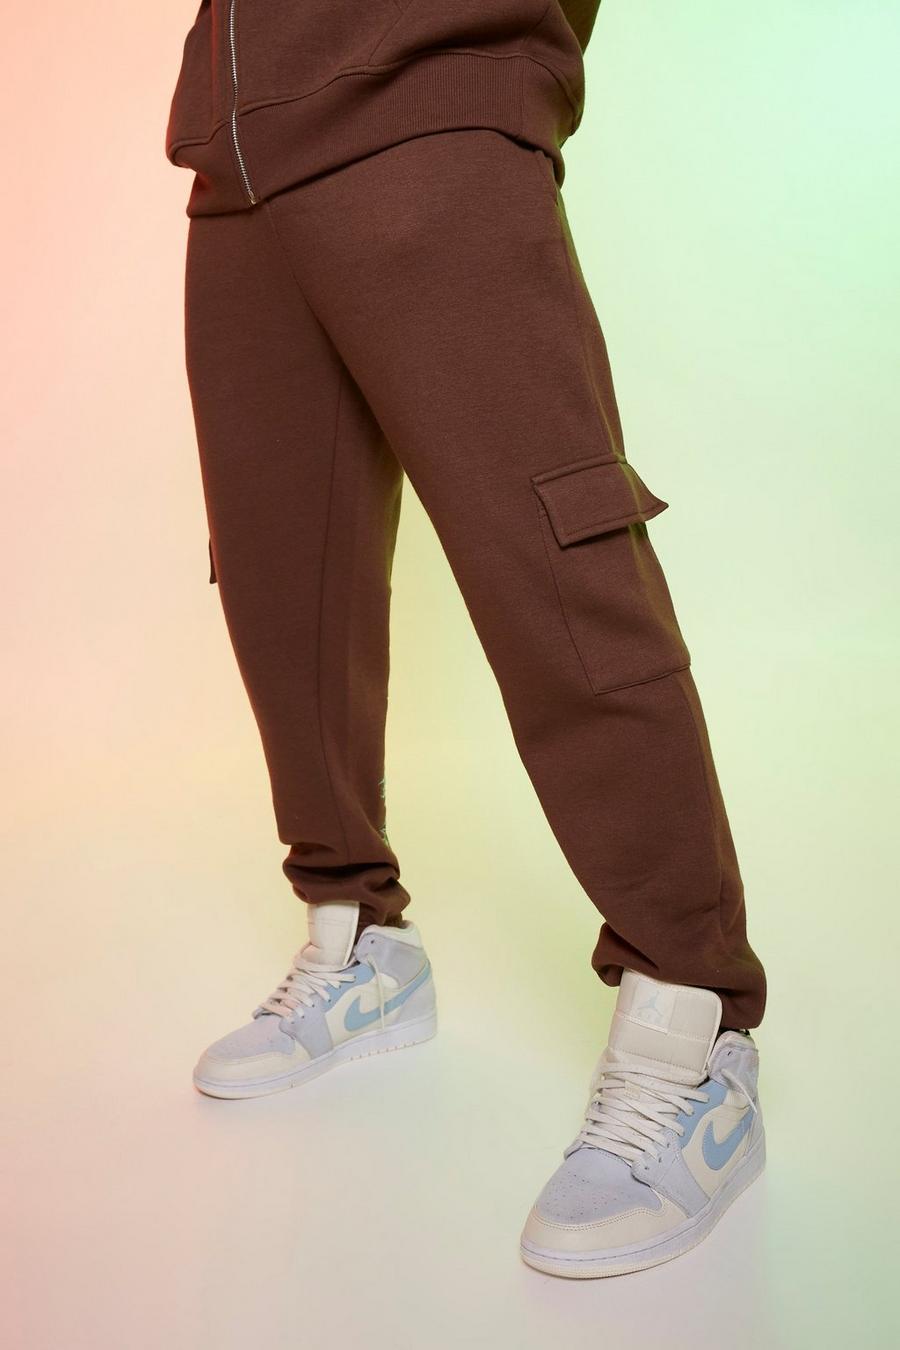 Chocolate brown Regular Fit Worldwide Graphic Cargo Jogger